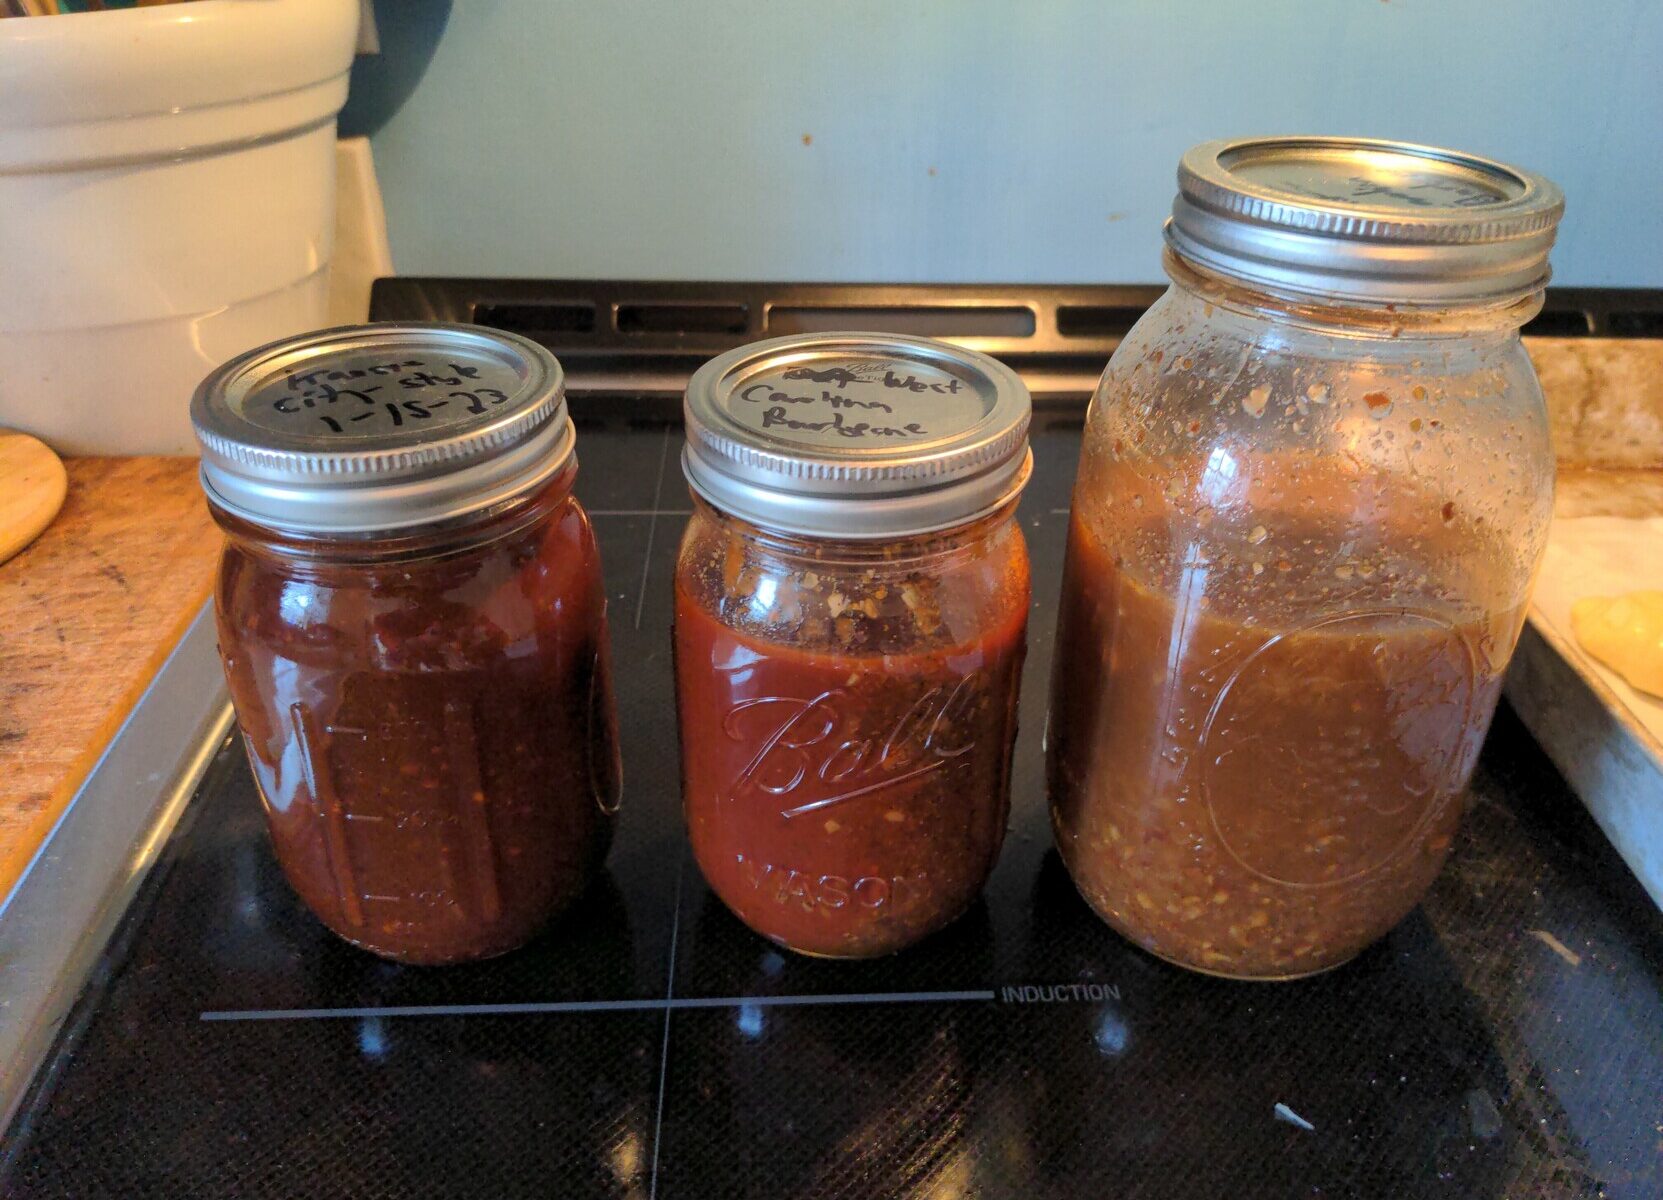 Three barbecue sauces - from left to right: Kansas City-style sauce, West Carolina-style sauce, East Carolina-style sauce